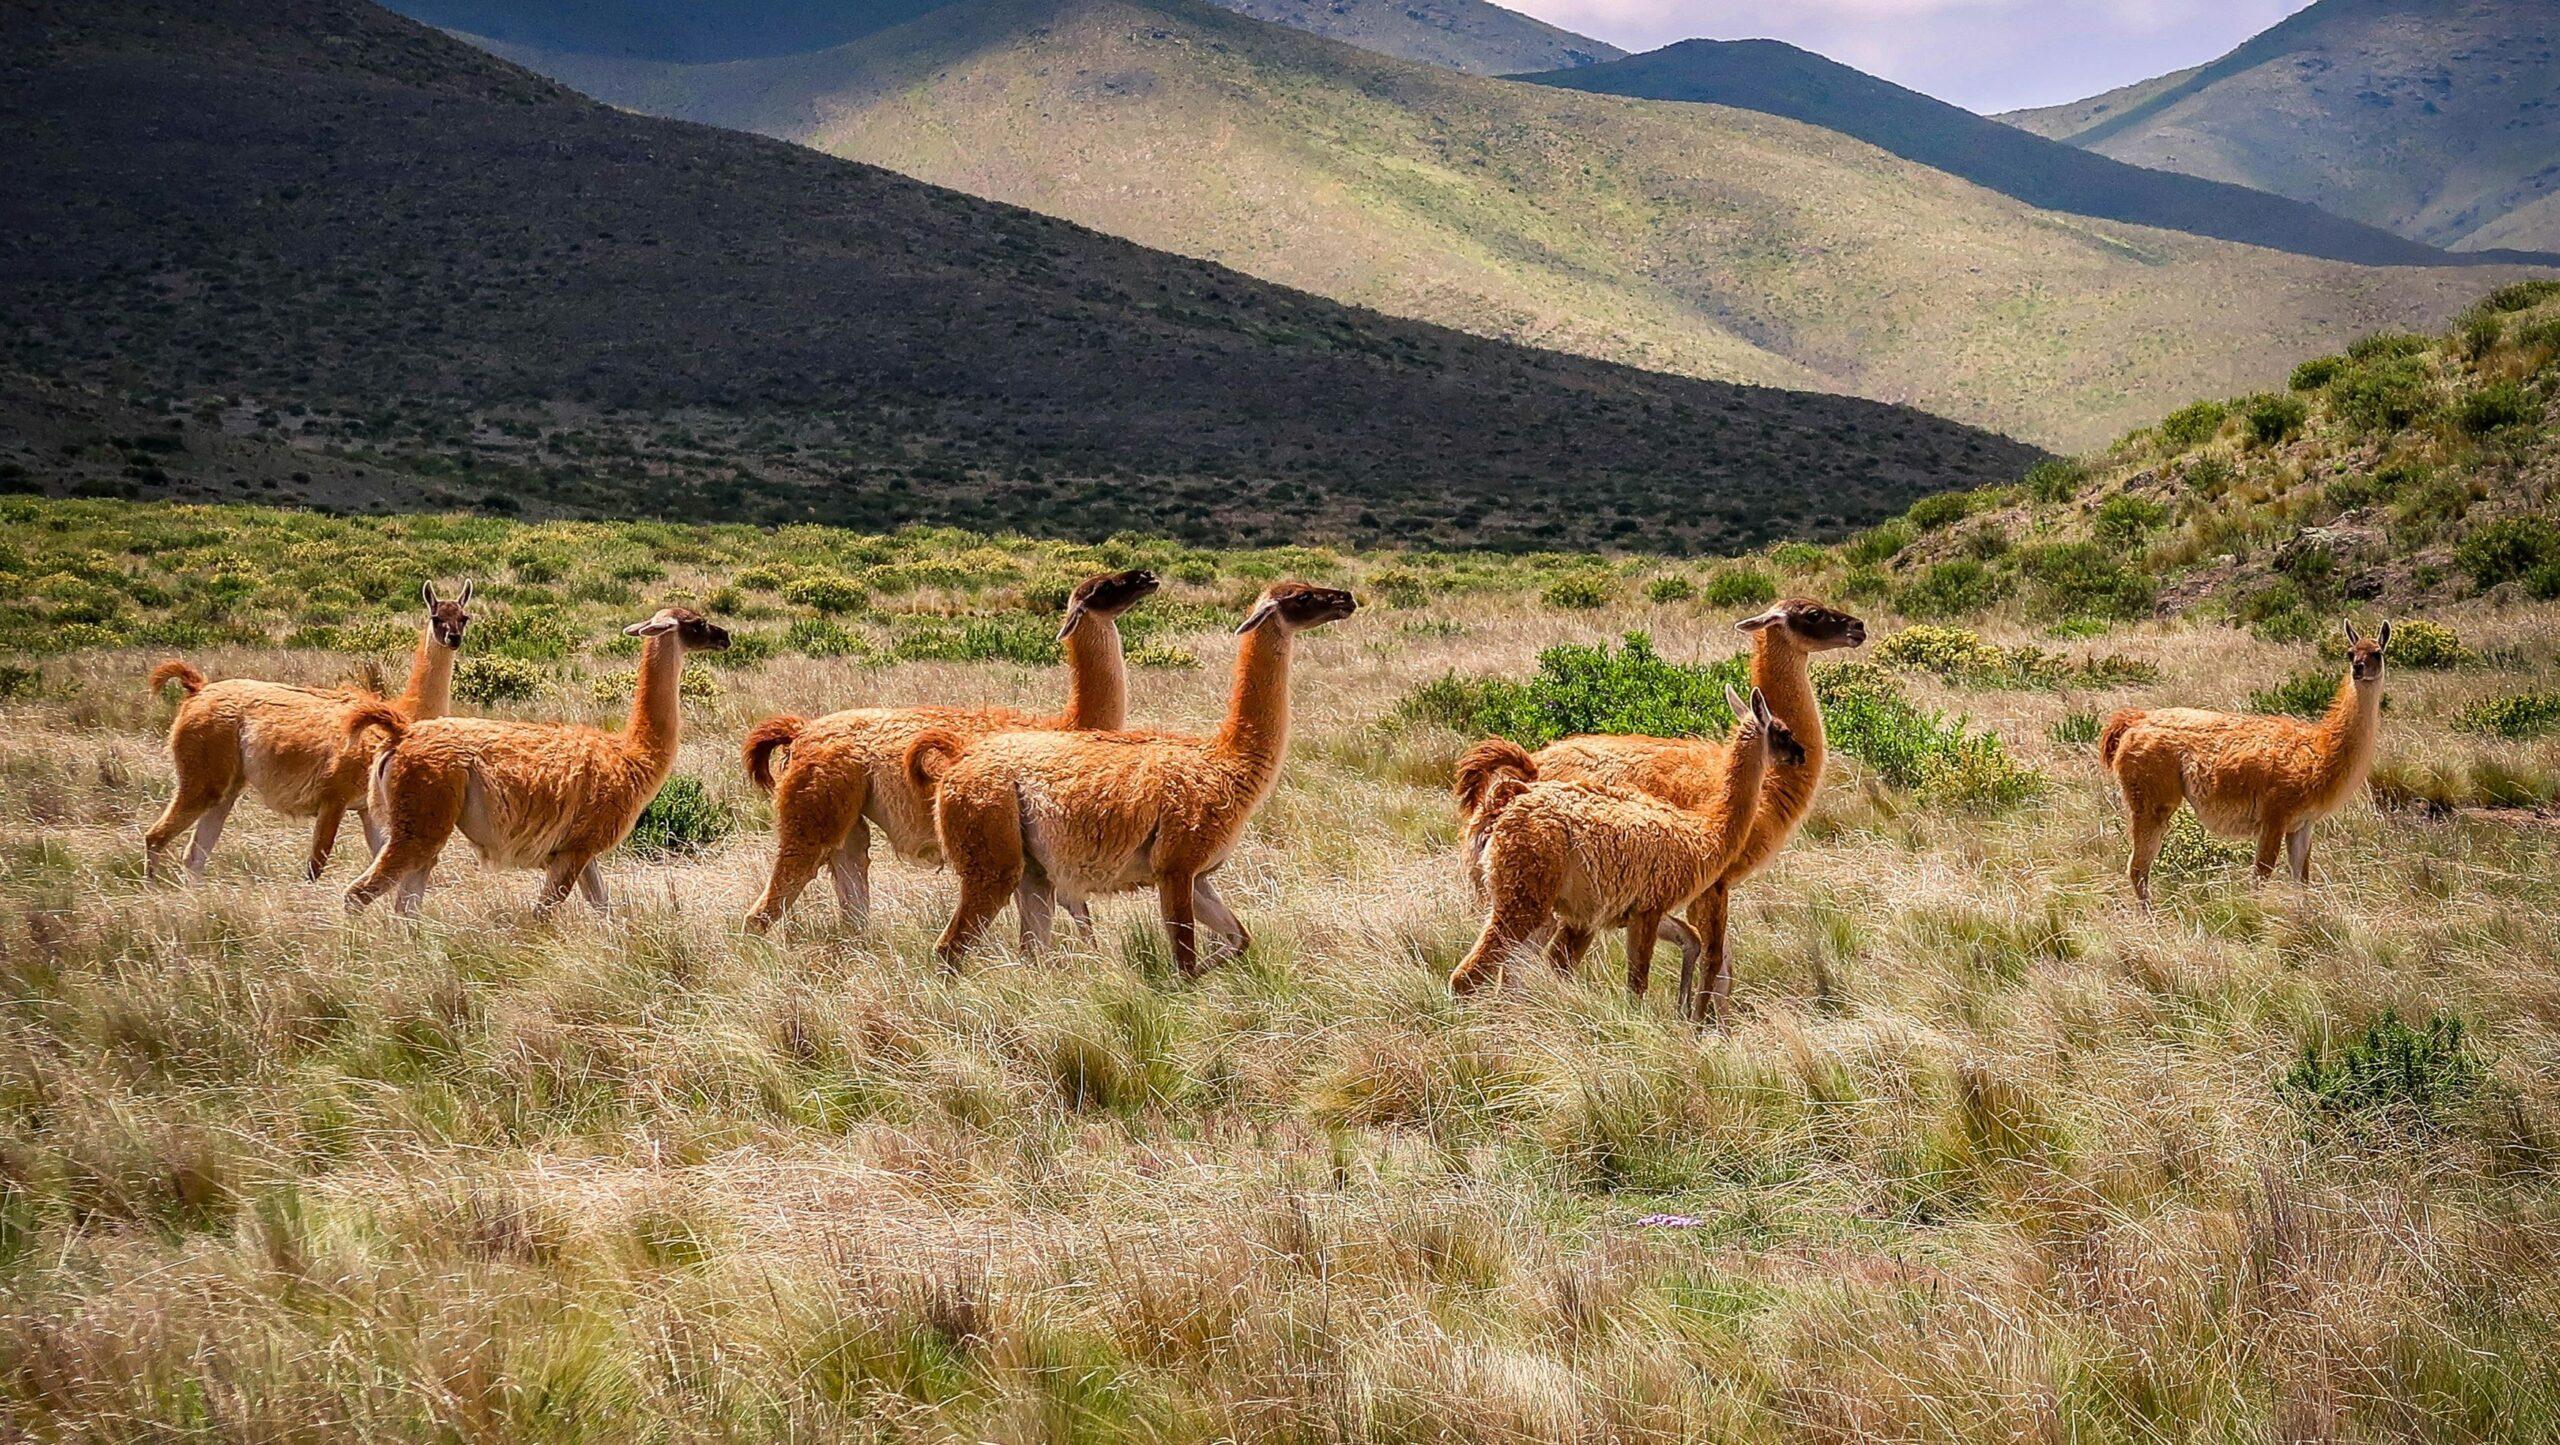 A herd of llamas against a mountainous background.